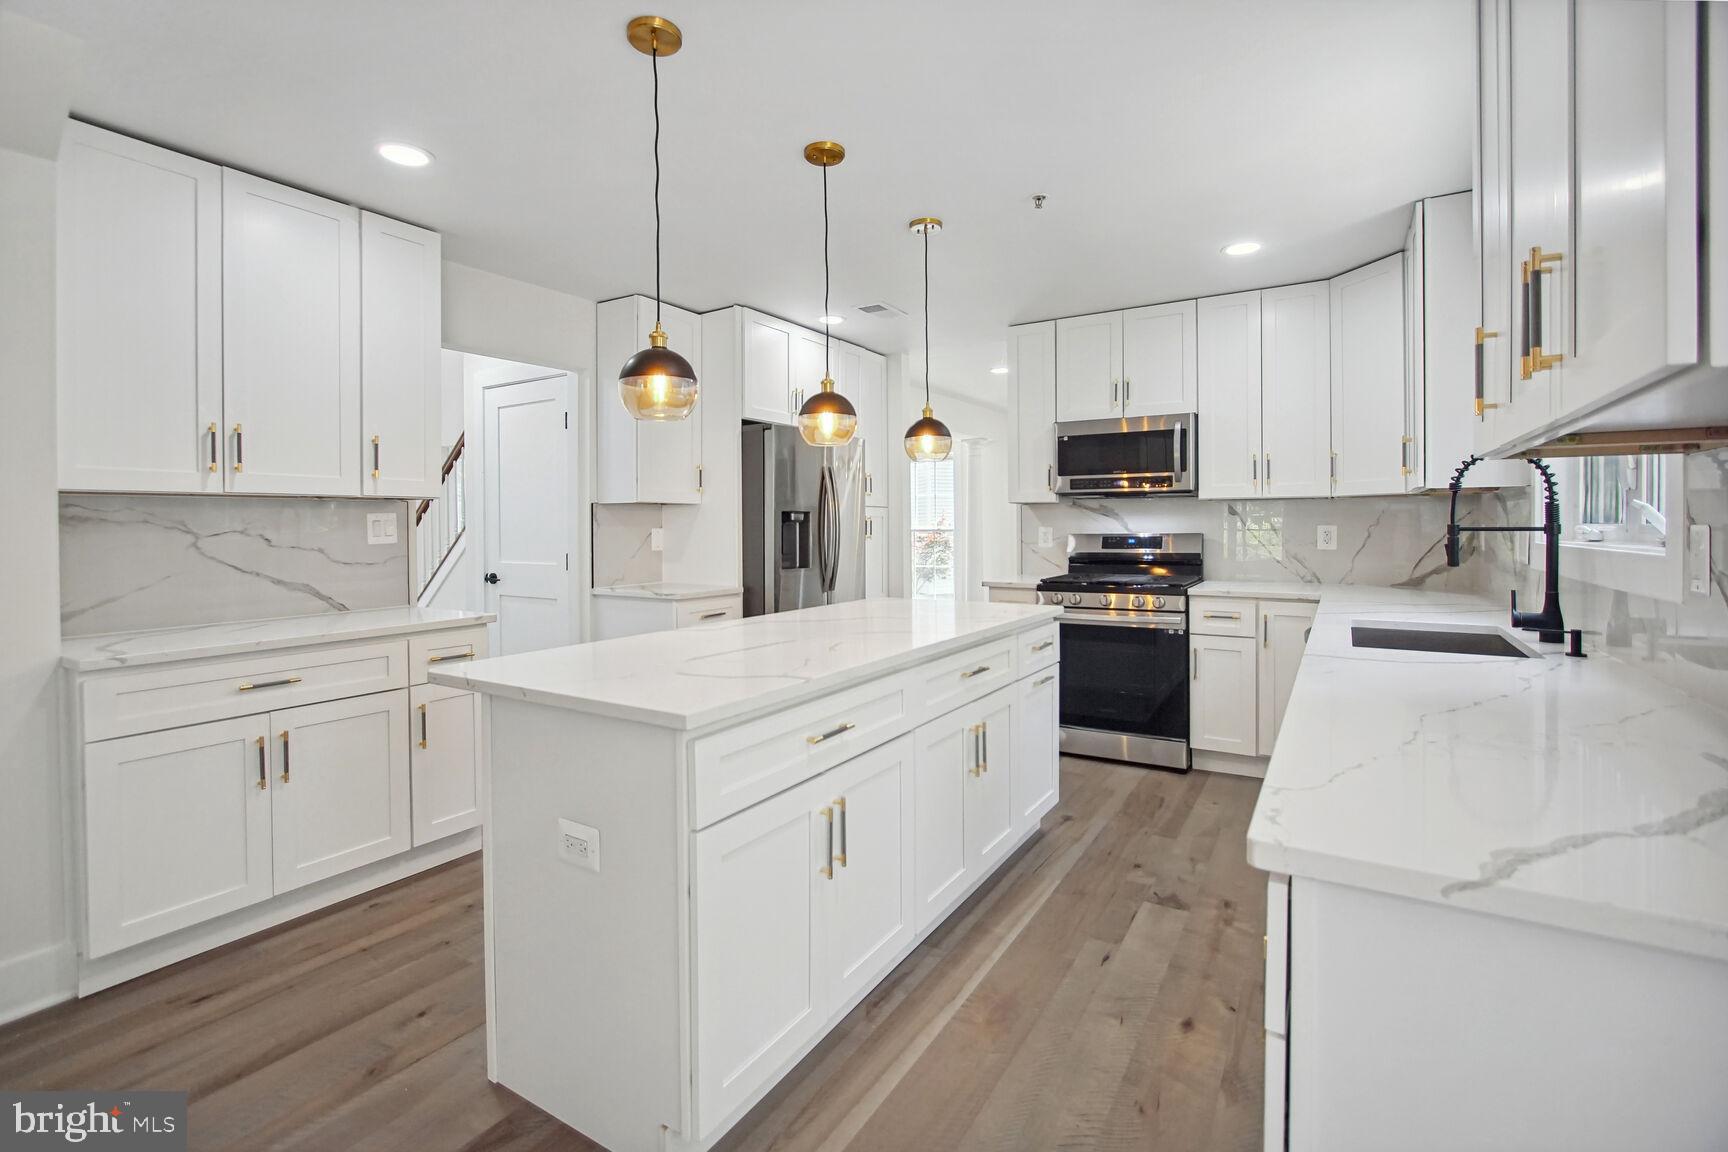 a kitchen that has a lot of white cabinets and stainless steel appliances